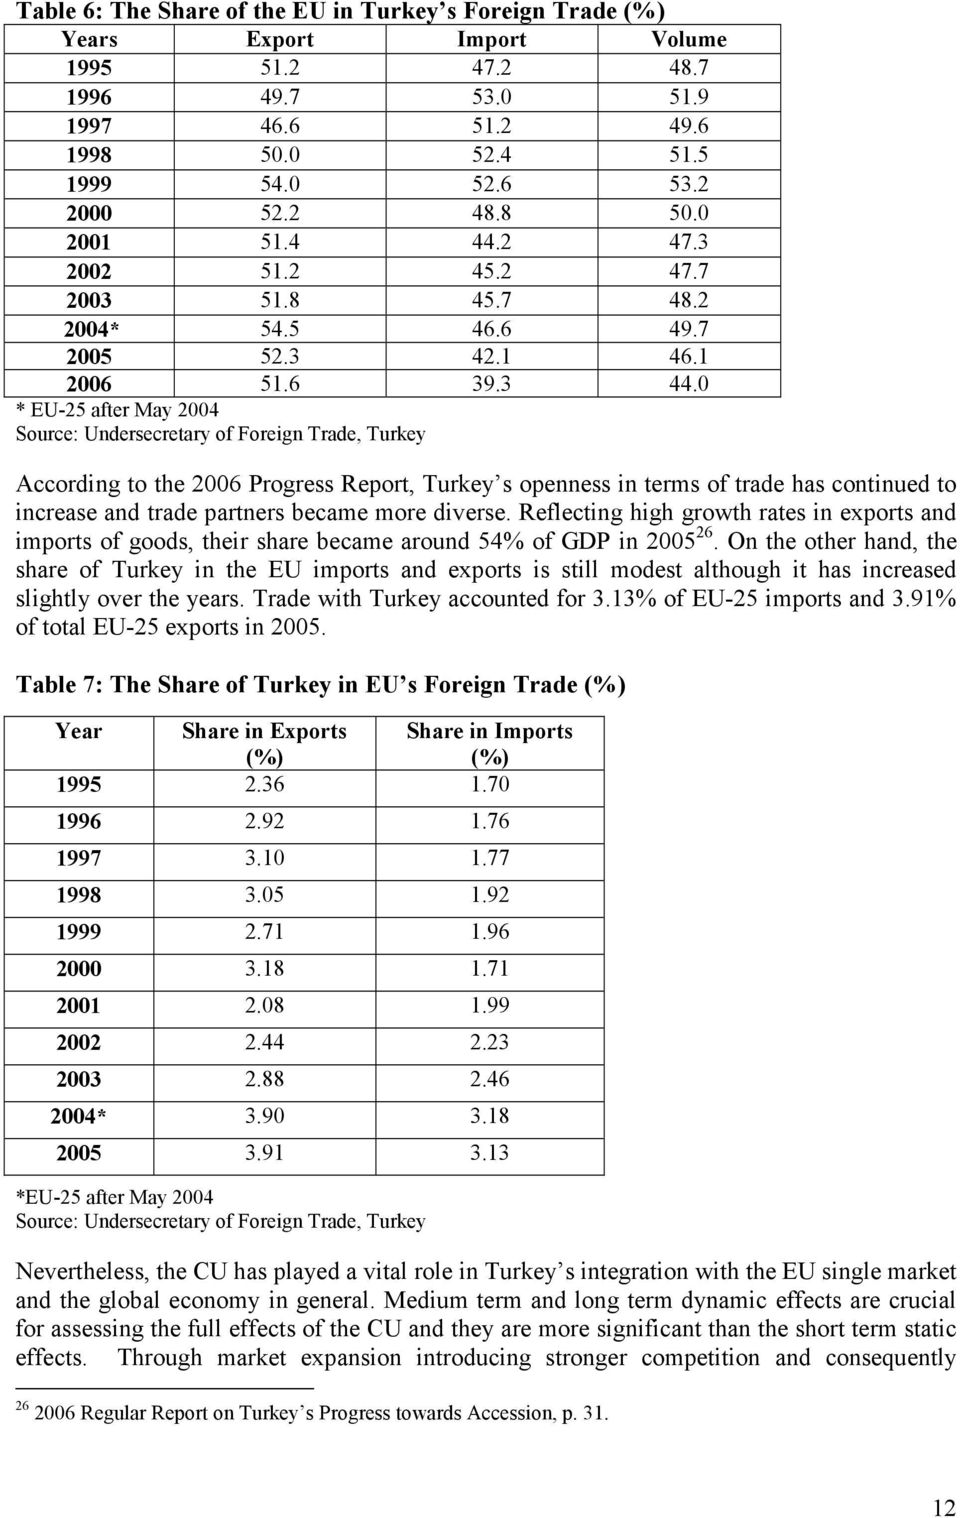 0 * EU-25 after May 2004 Source: Undersecretary of Foreign Trade, Turkey According to the 2006 Progress Report, Turkey s openness in terms of trade has continued to increase and trade partners became